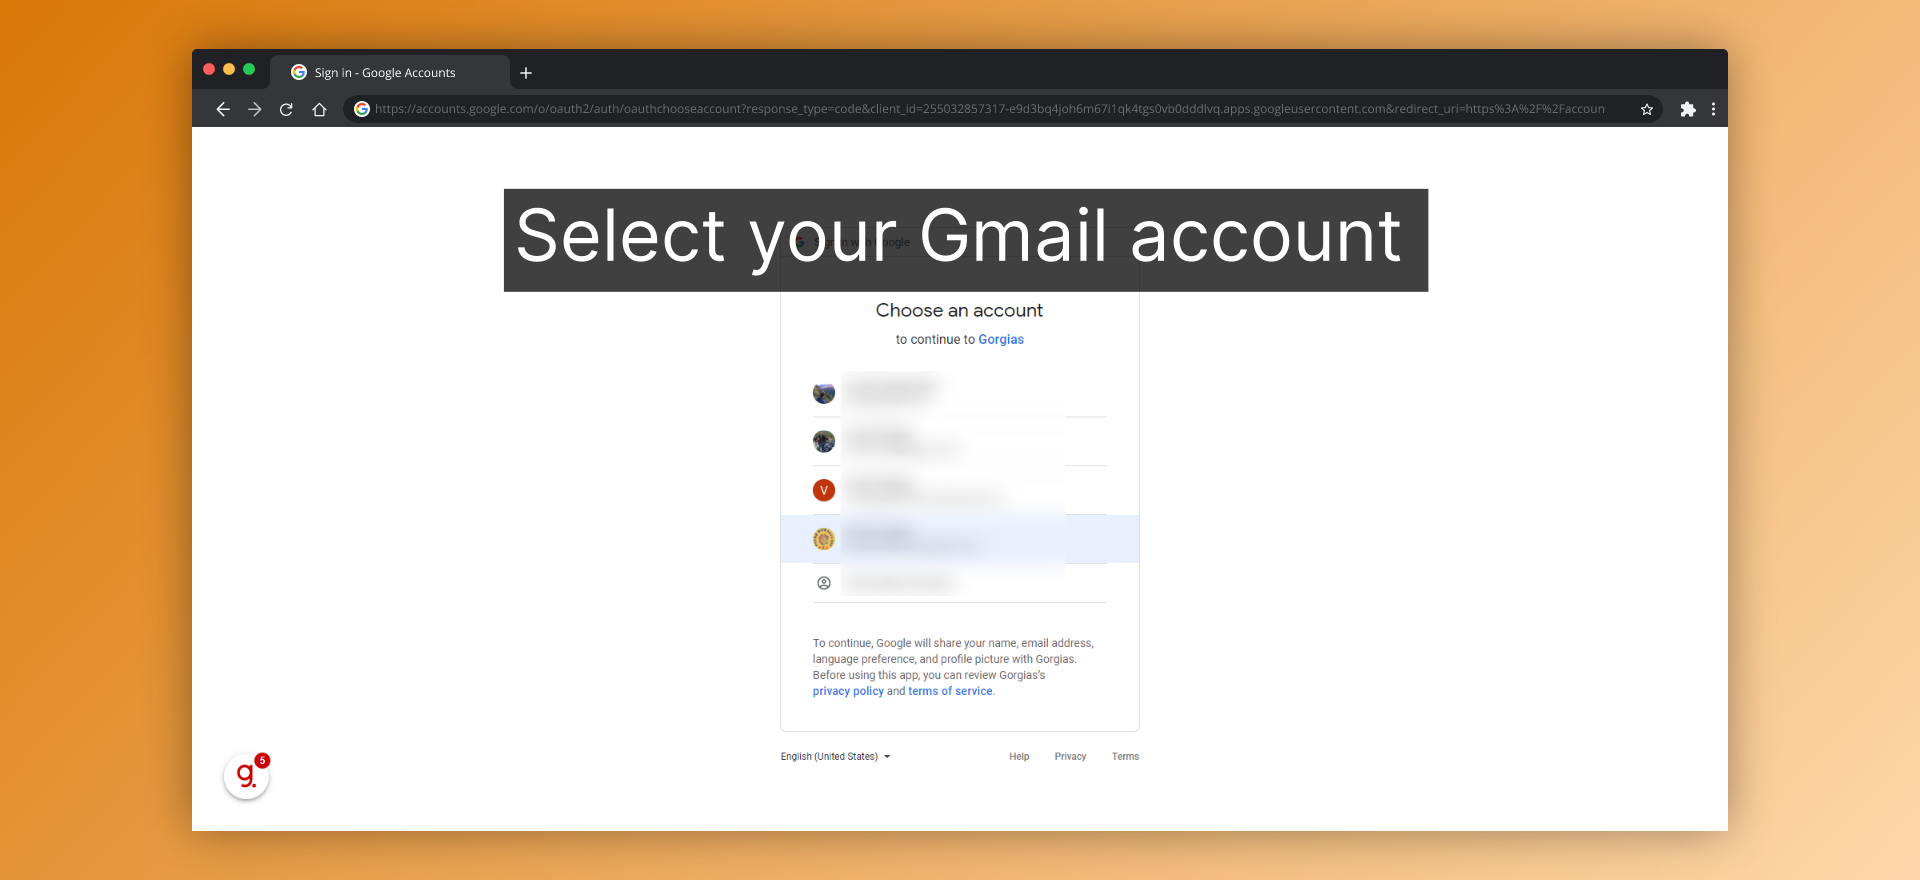 Select your Gmail account